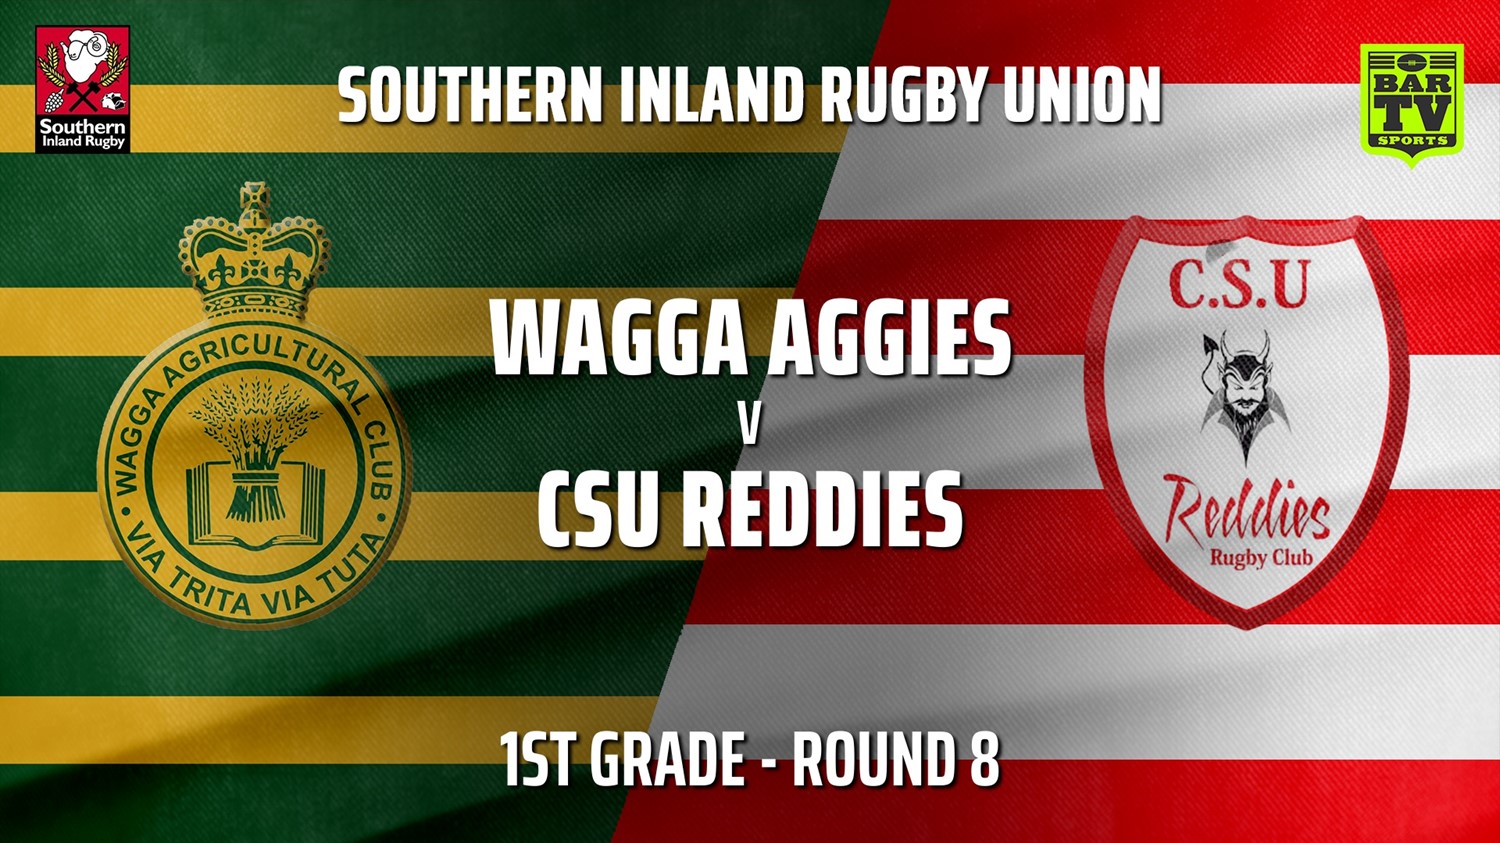 210529-Southern Inland Rugby Union Round 8 - 1st Grade - Wagga Agricultural College v CSU Reddies Minigame Slate Image